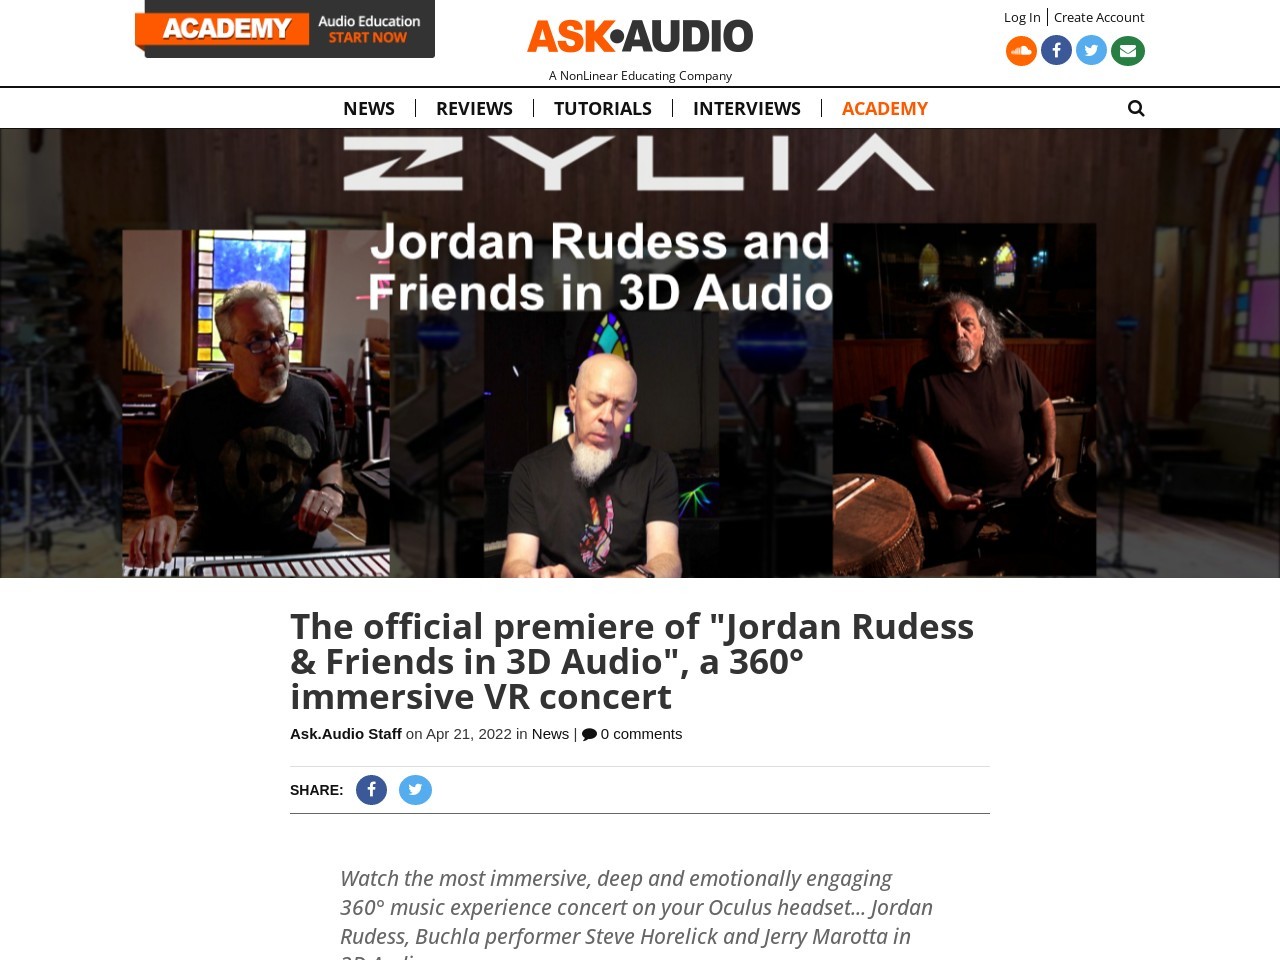 The official premiere of “Jordan Rudess & Friends in 3D Audio”, a 360 : Ask.Audio